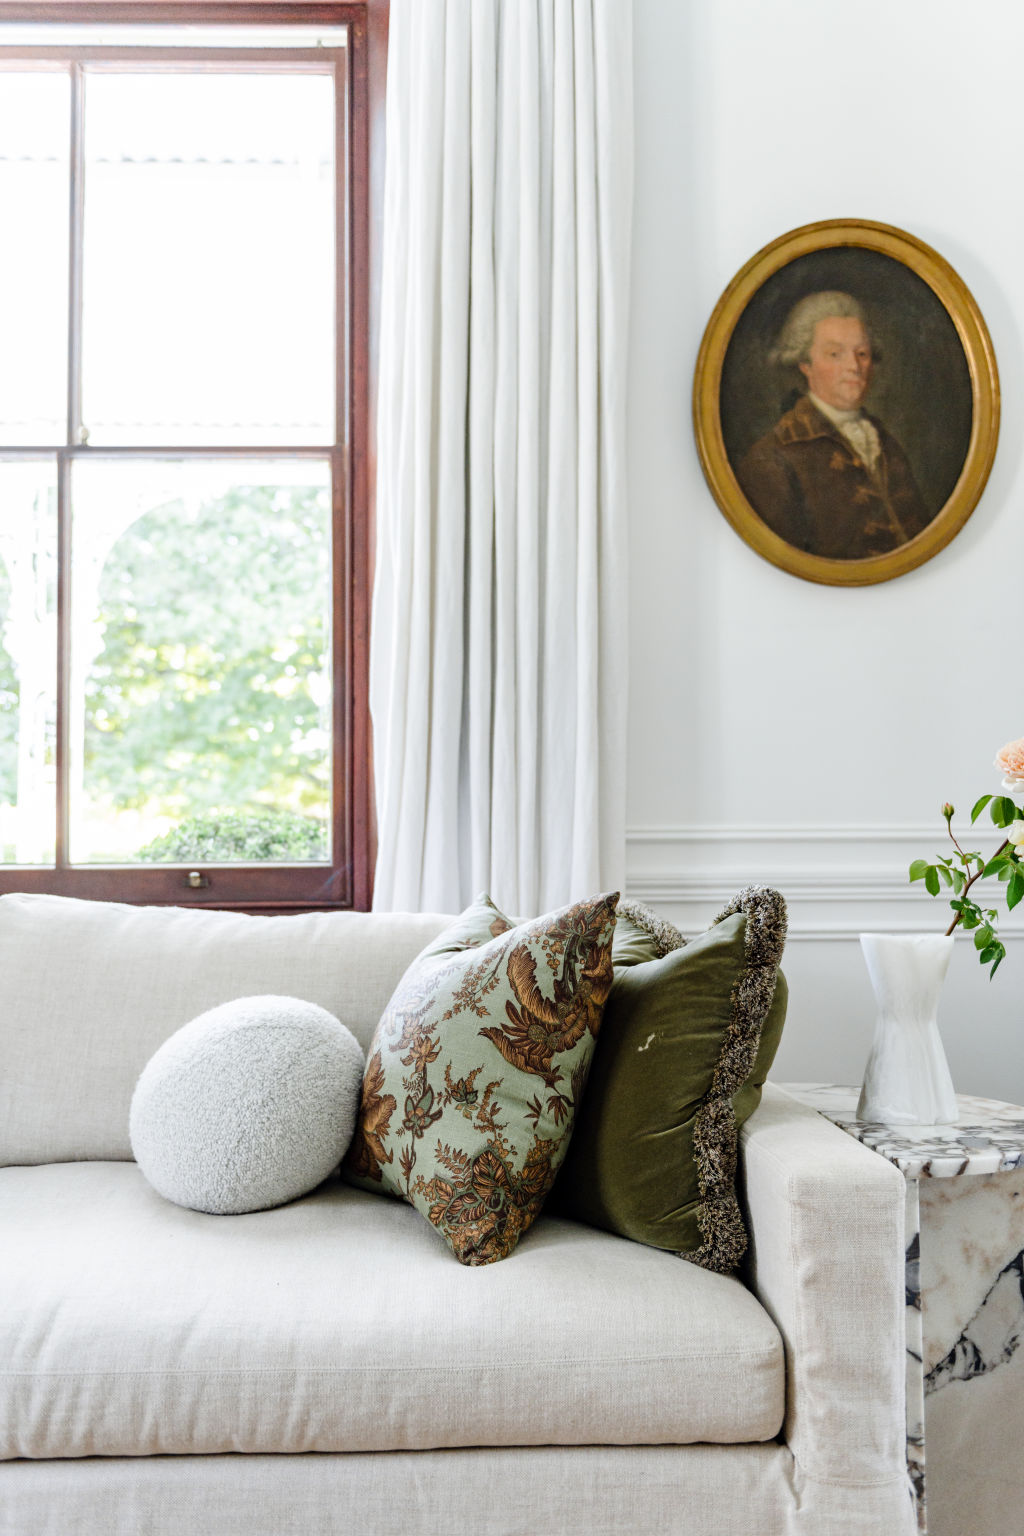 'I wanted a contemporary take on a European-style home,' Cordony says, pairing old and new furnishings to achieve the look. Photo: Monique Lovick